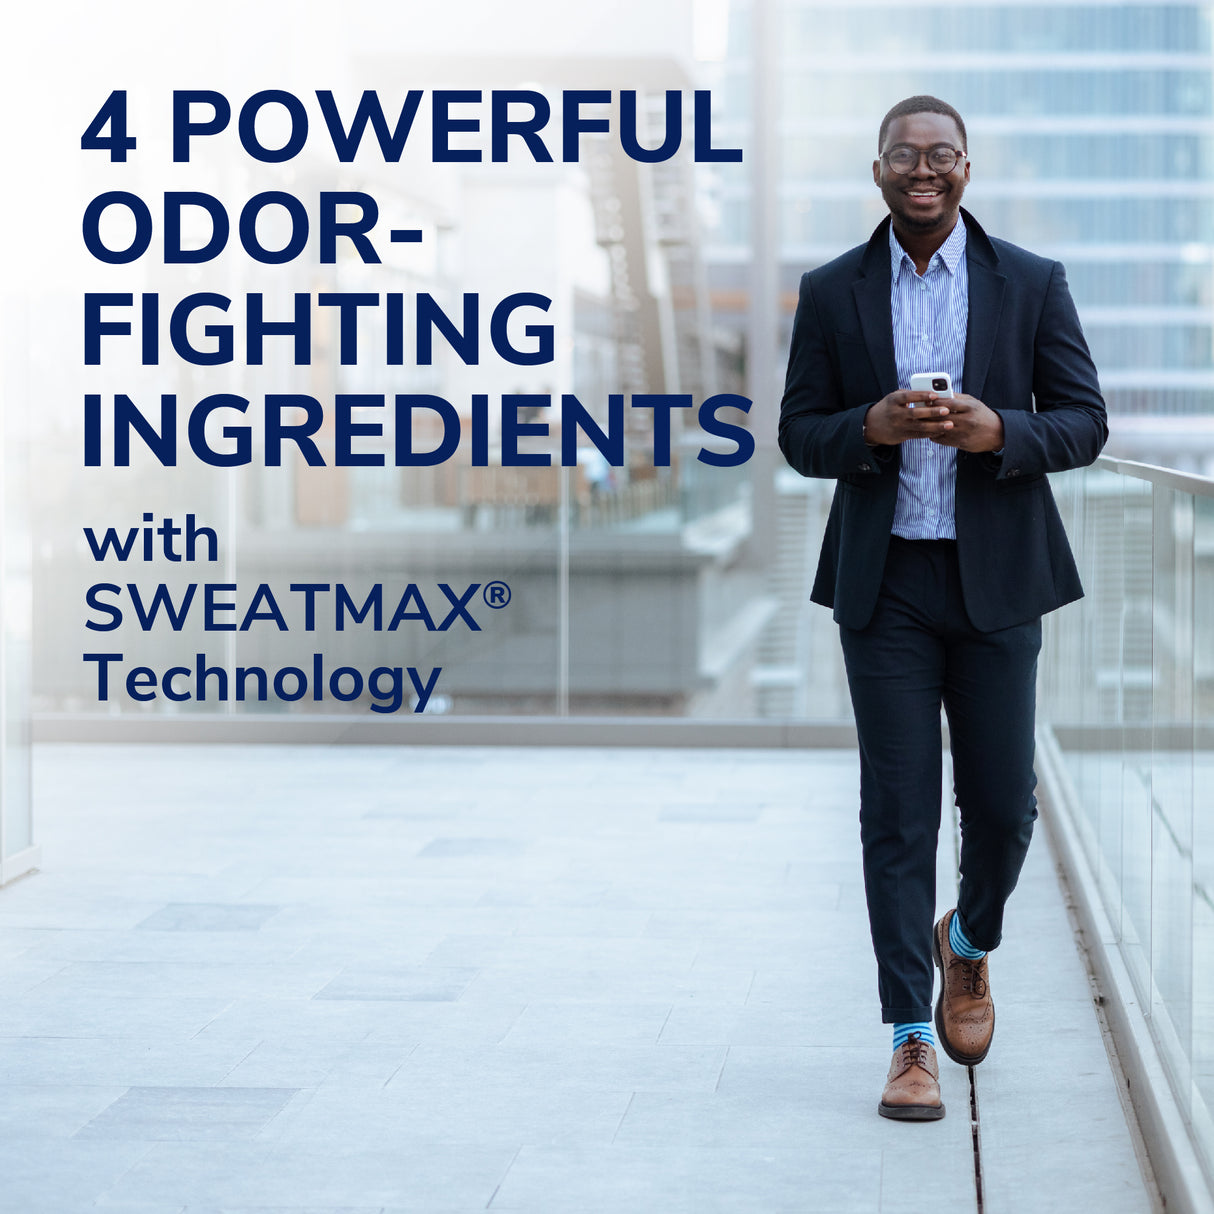 image of 4 powerful odor fighting ingredients with sweatmax technology